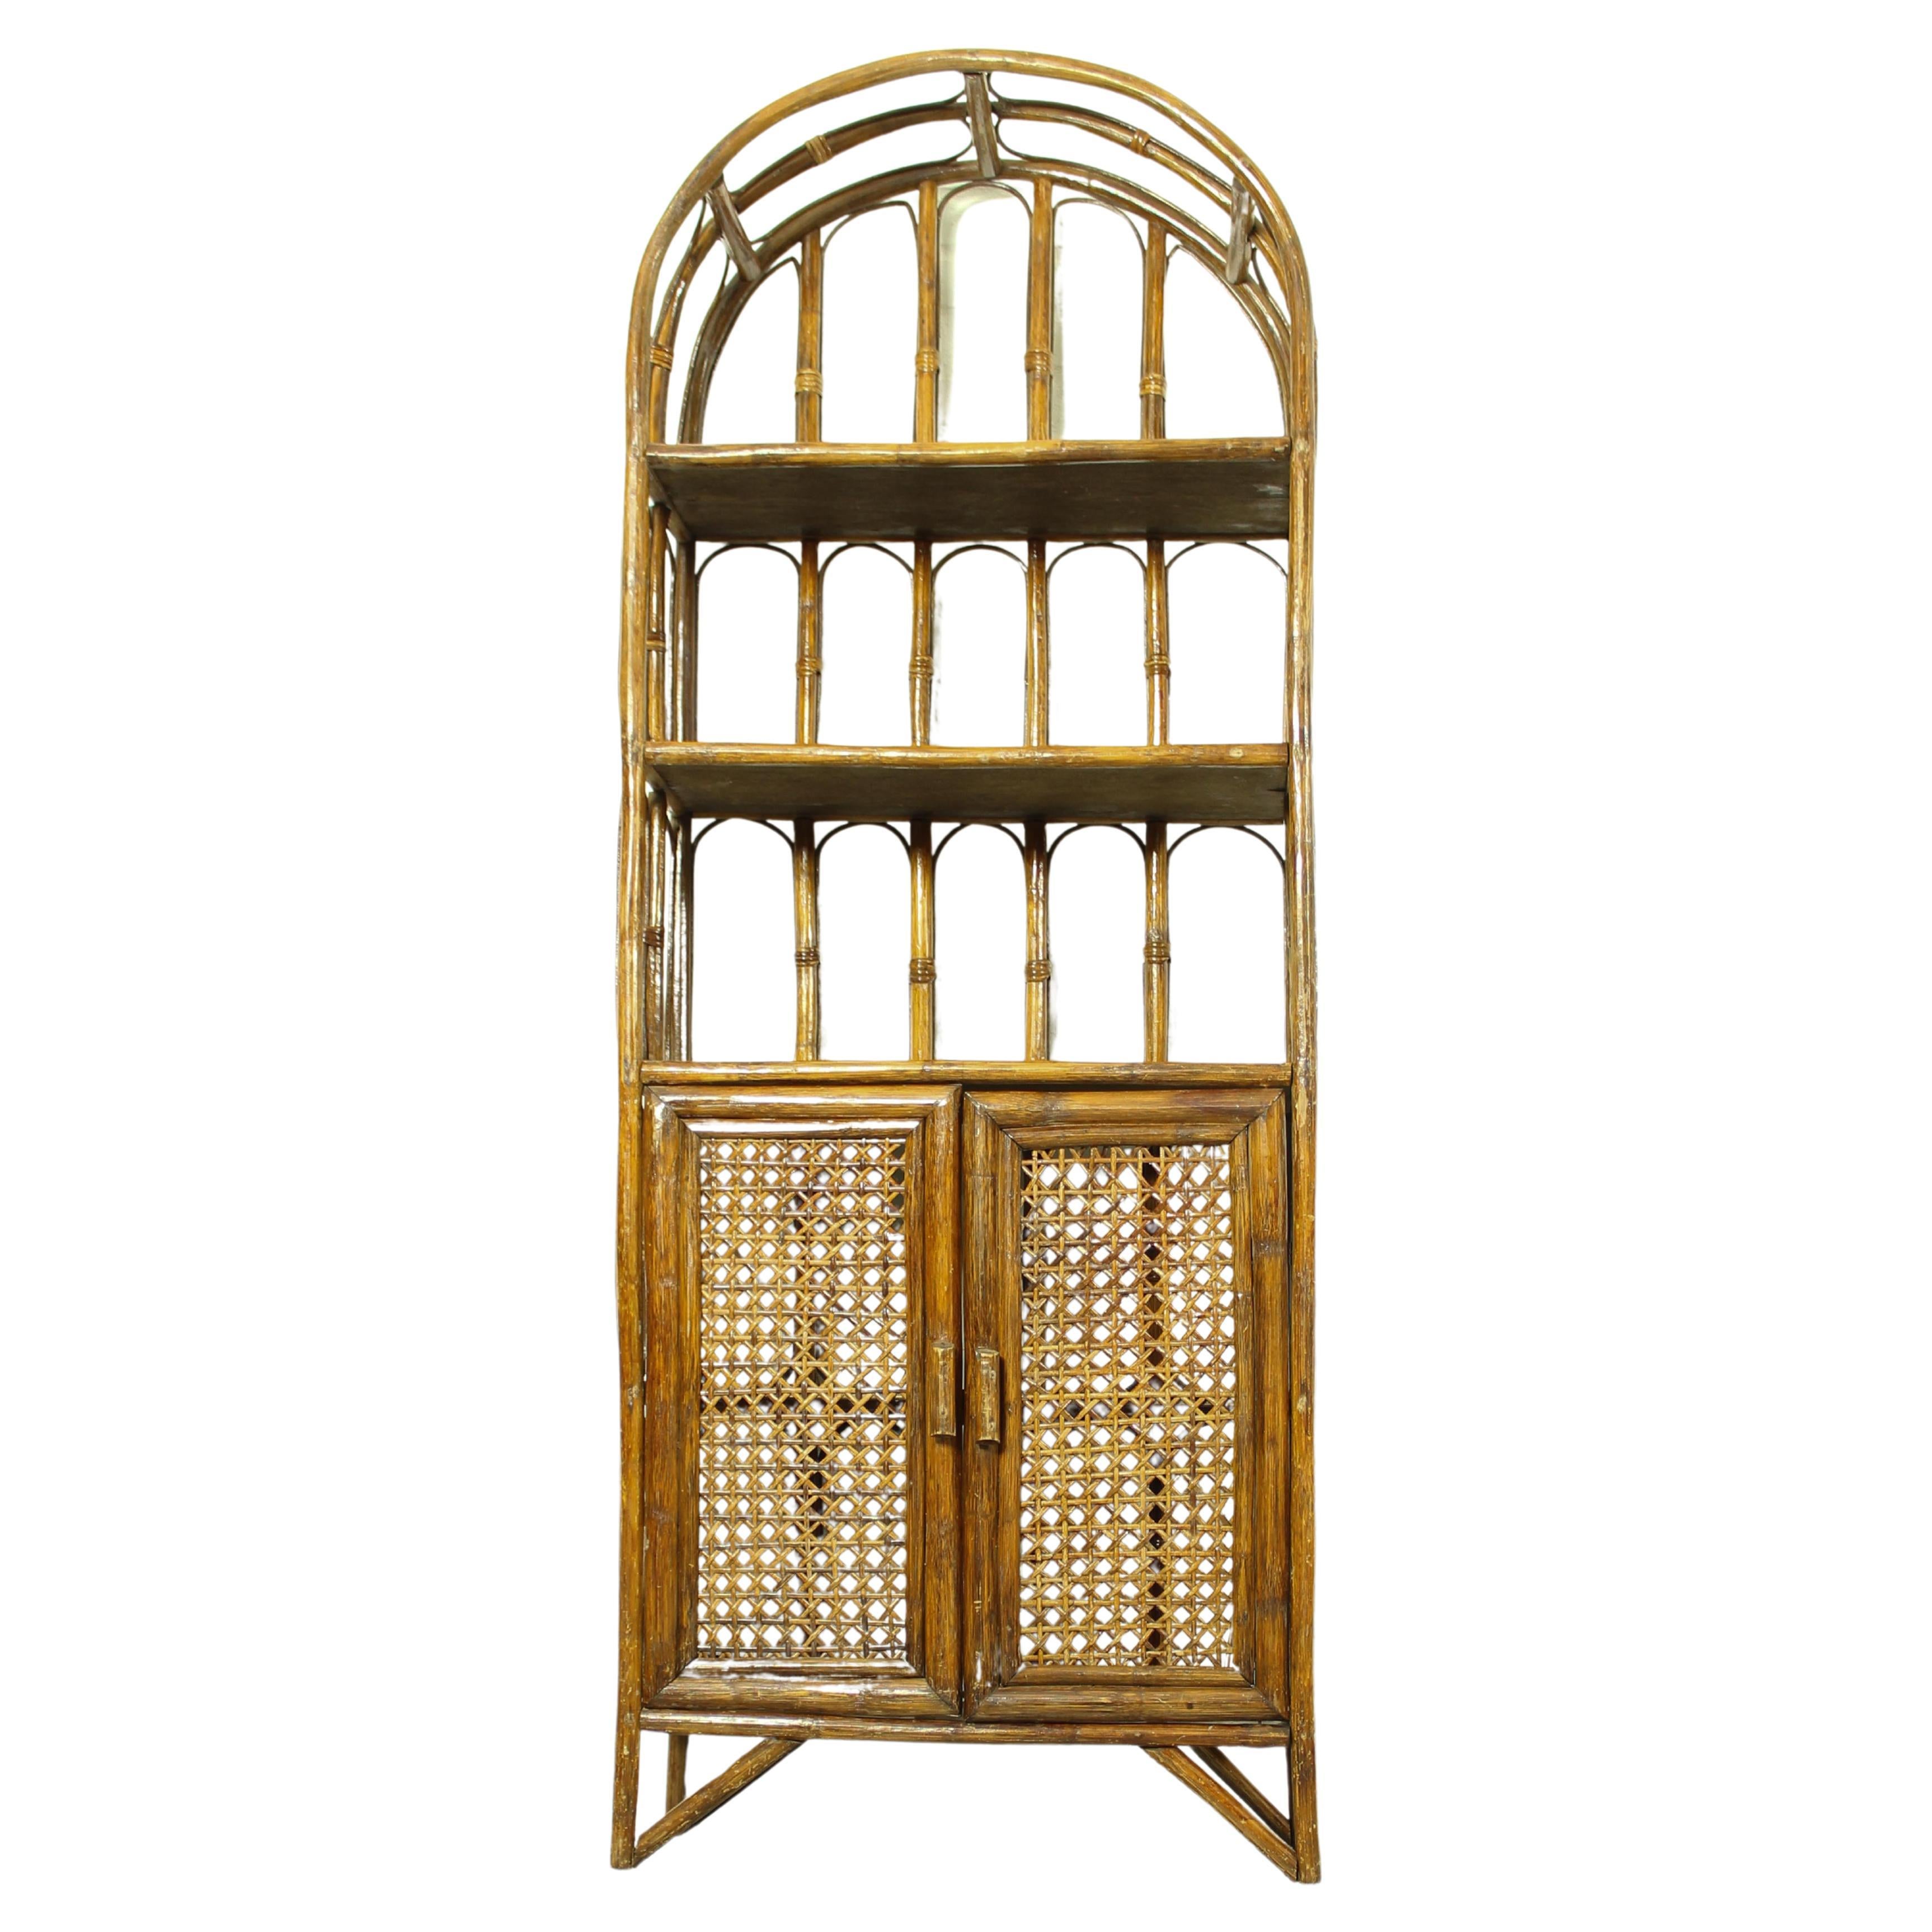 Mid-Century French Bamboo Etagere, France 1960s